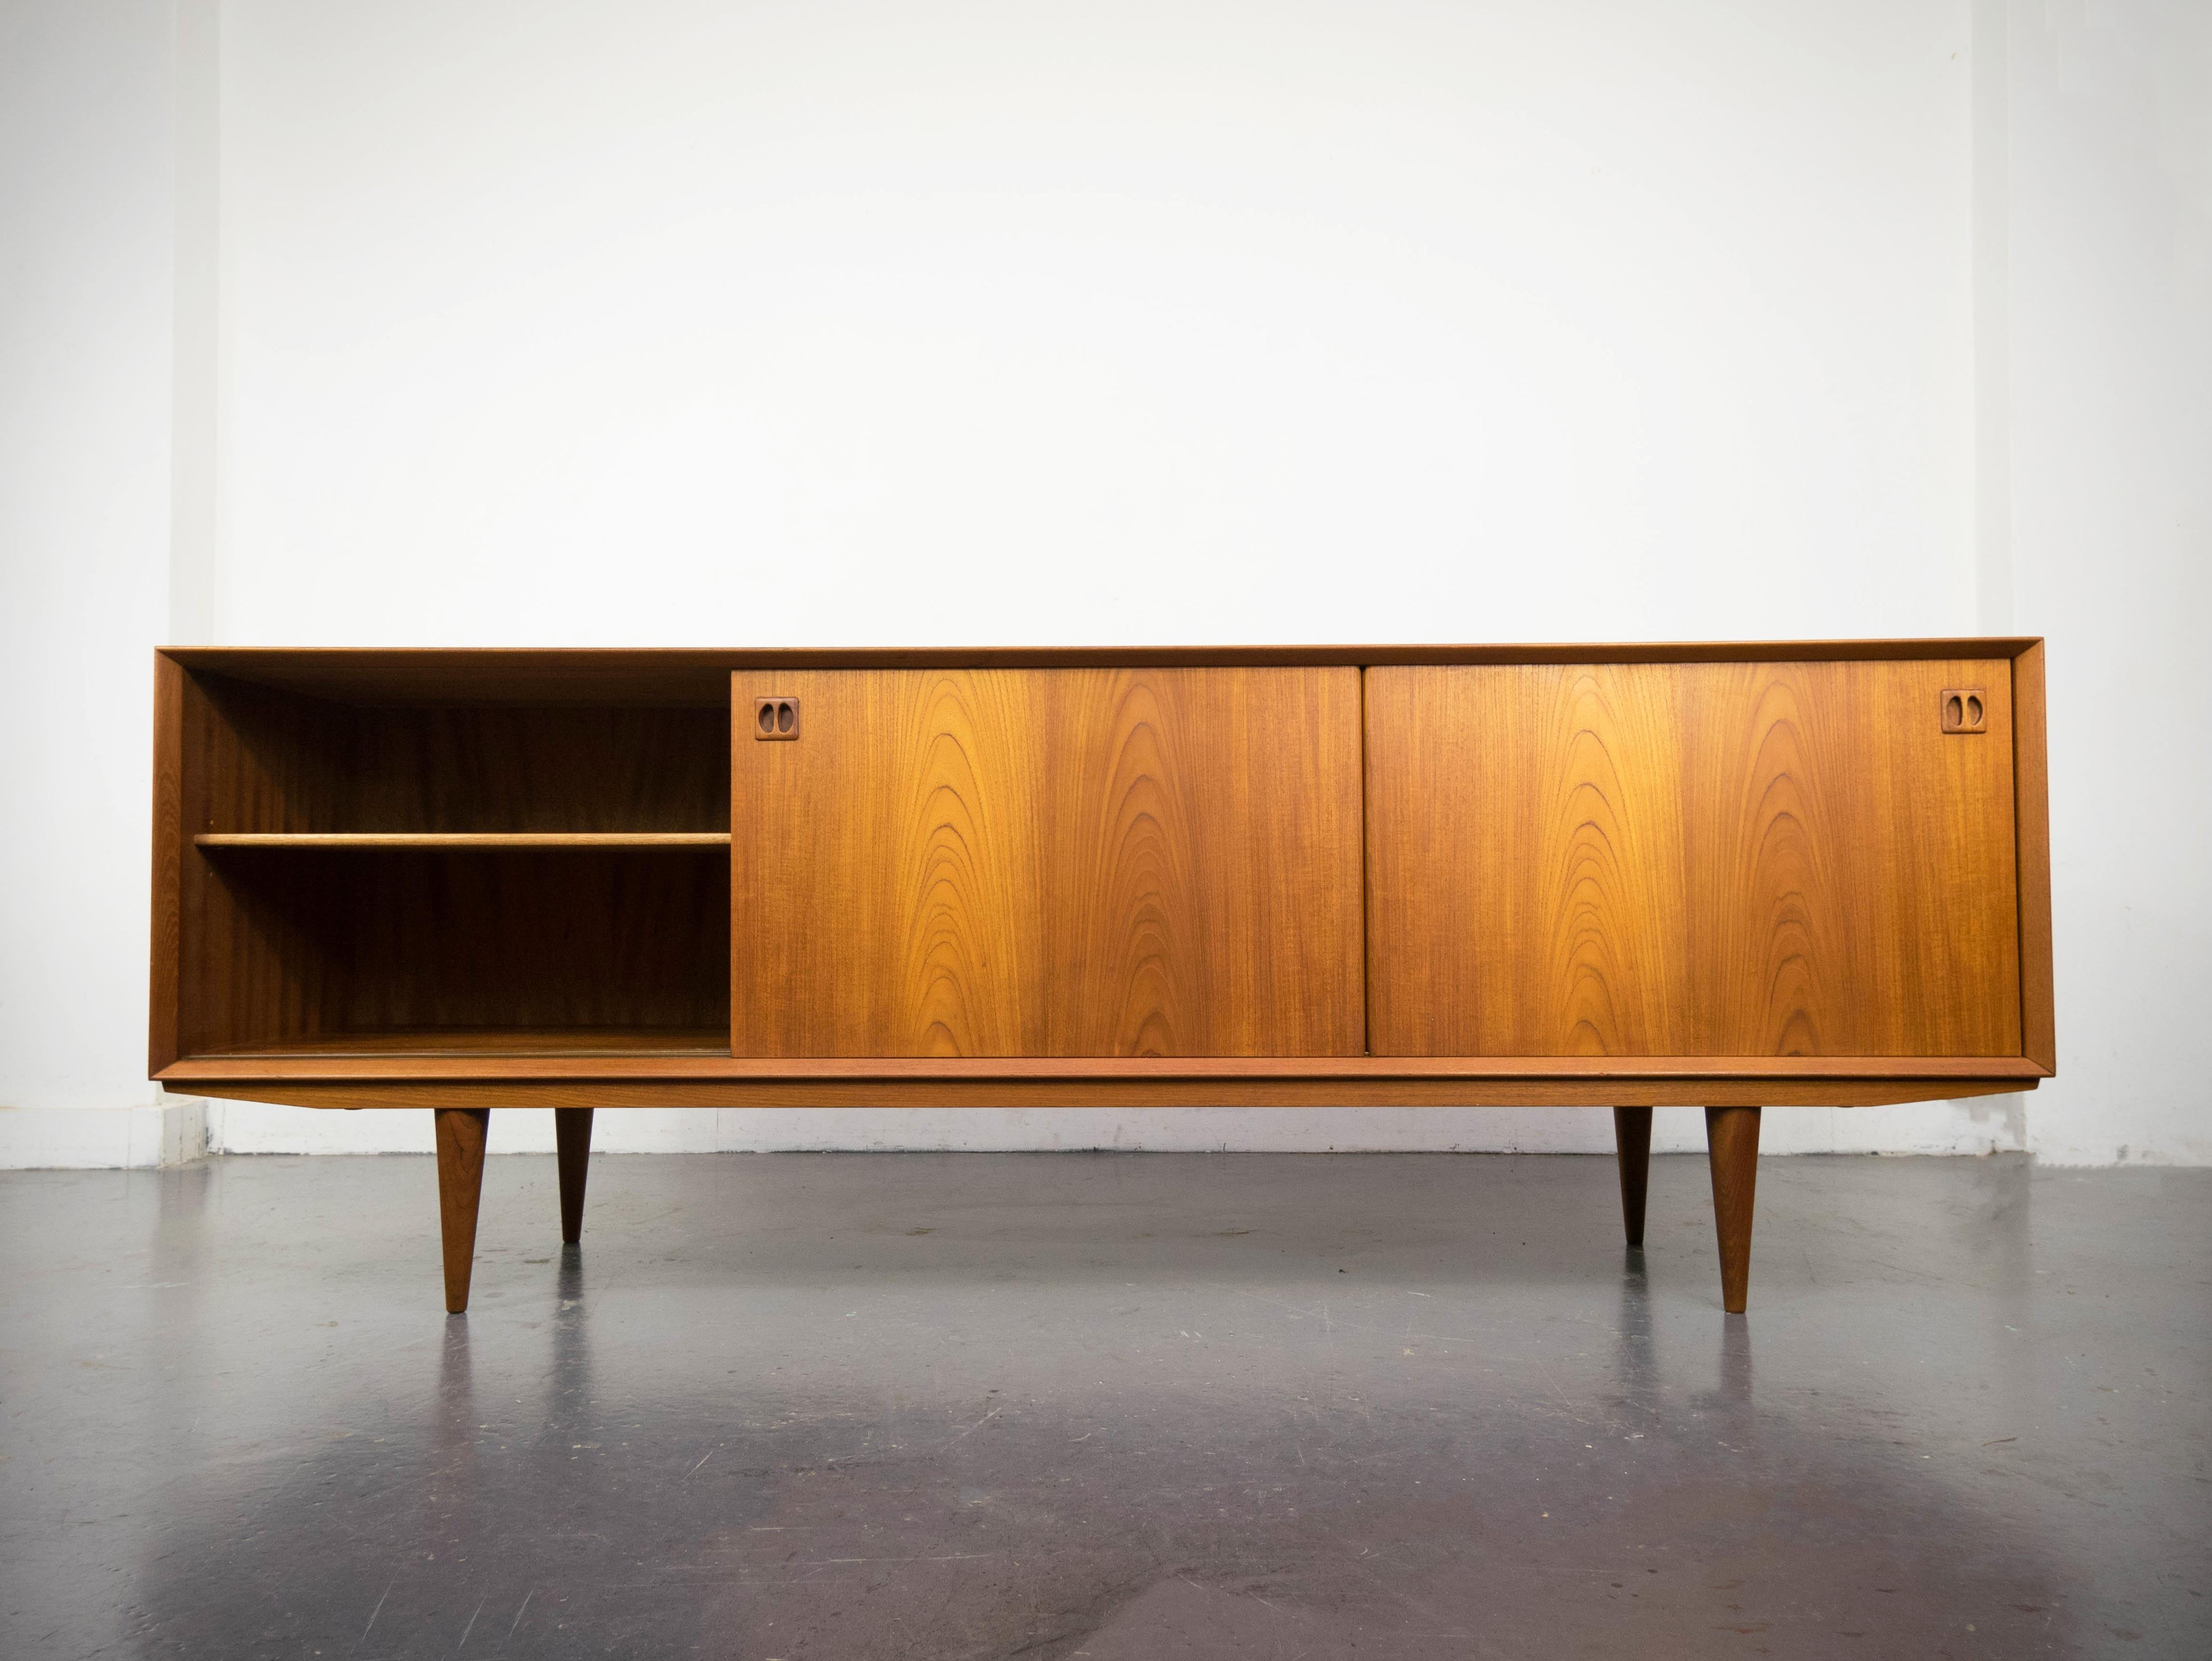 A beautifully designed and crafted teak sideboard manufactured by Clausen and Son of Silkeborg, Denmark. Featuring a Minimalist modern design with superb build quality throughout. Luminous teak exterior, two large cupboards with adjustable shelf in